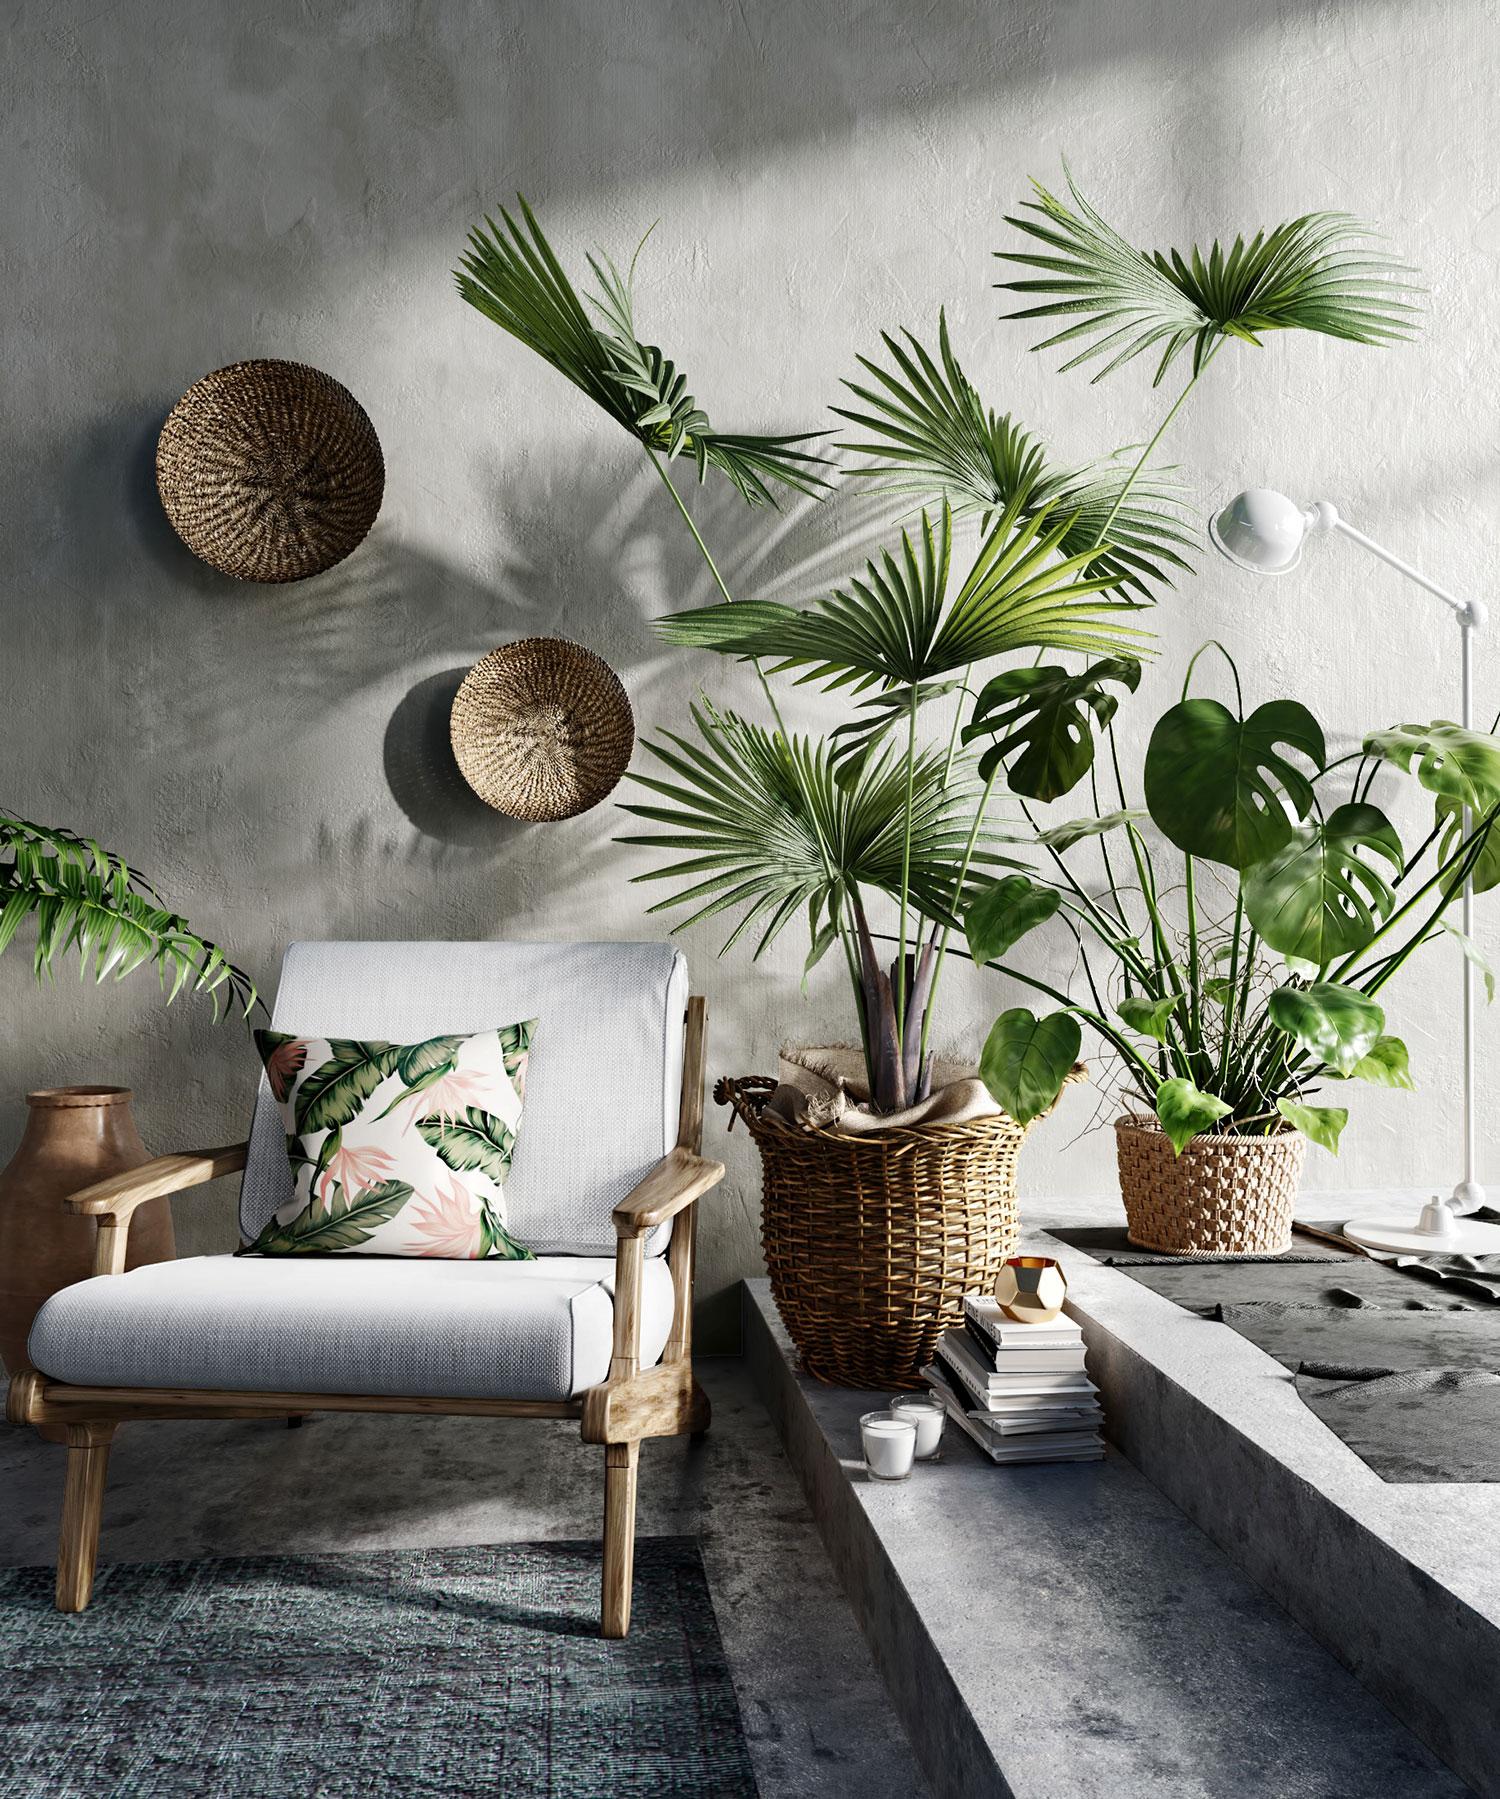 4 Gorgeous House Plant Ideas to Brighten Up Your Rooms